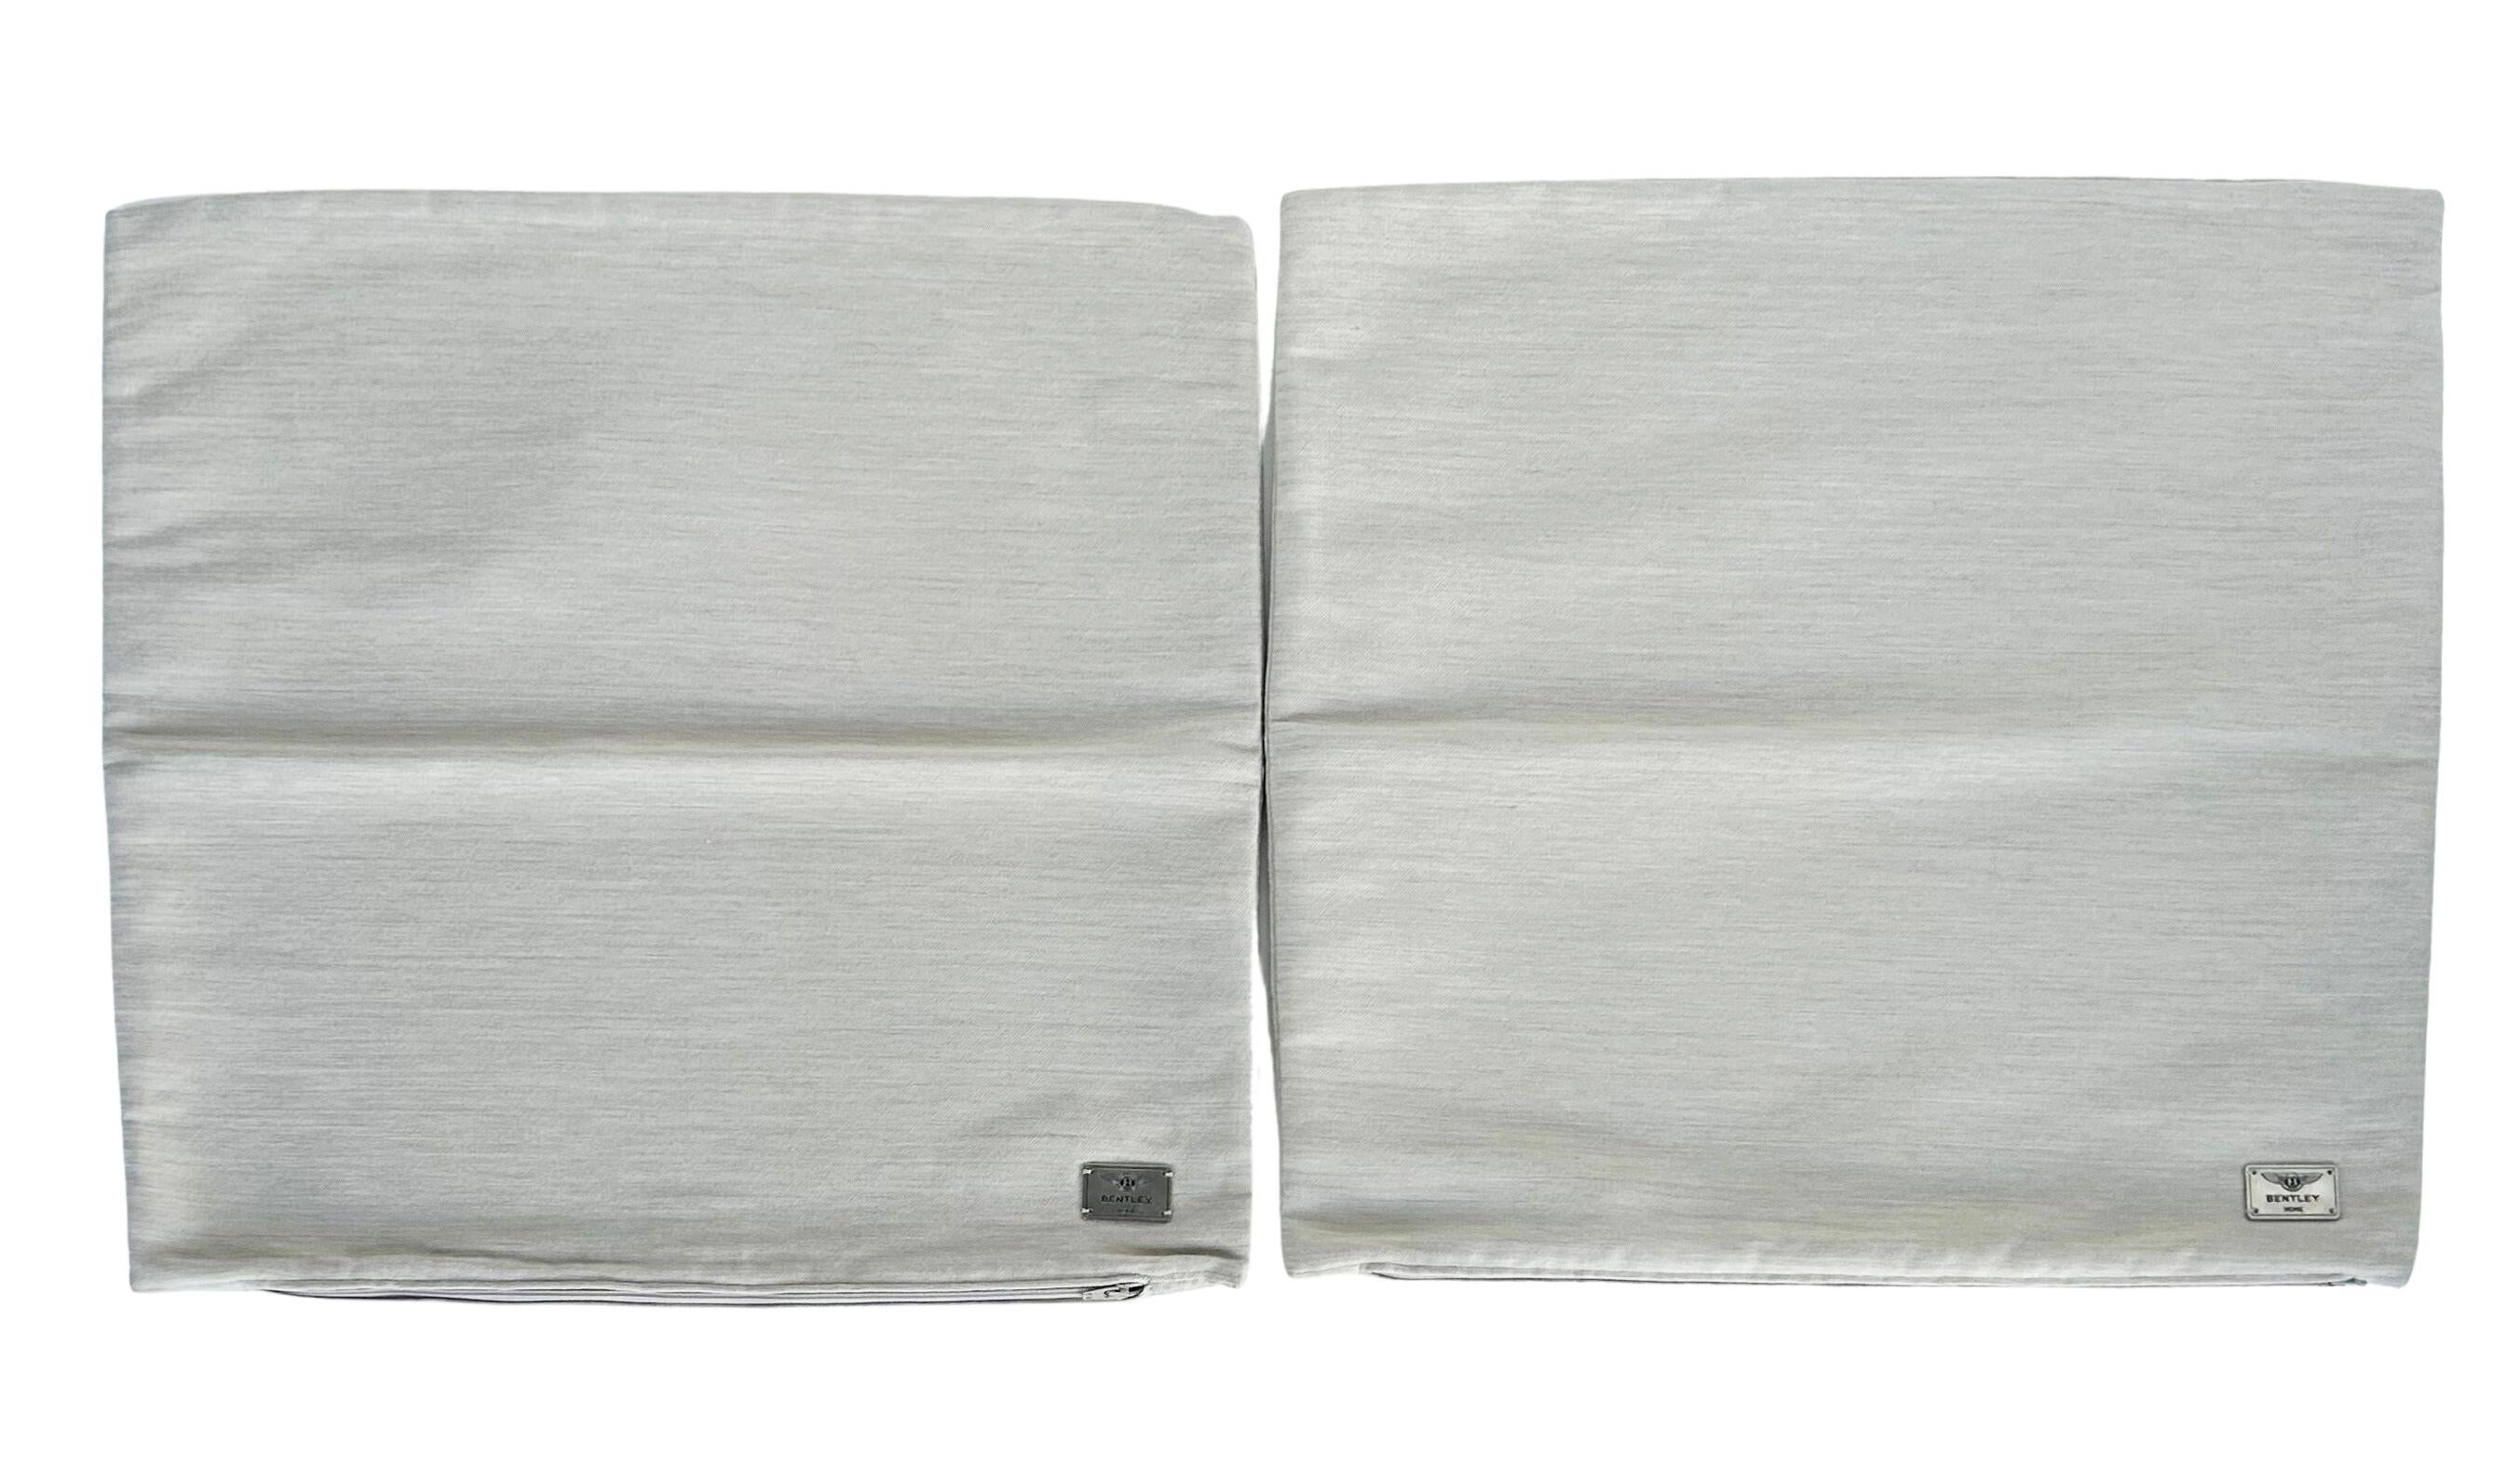 Pair of Bentley Home Collection Beige Pillow Covers in Cotton, Wool and Nylon In Excellent Condition For Sale In Miami, FL